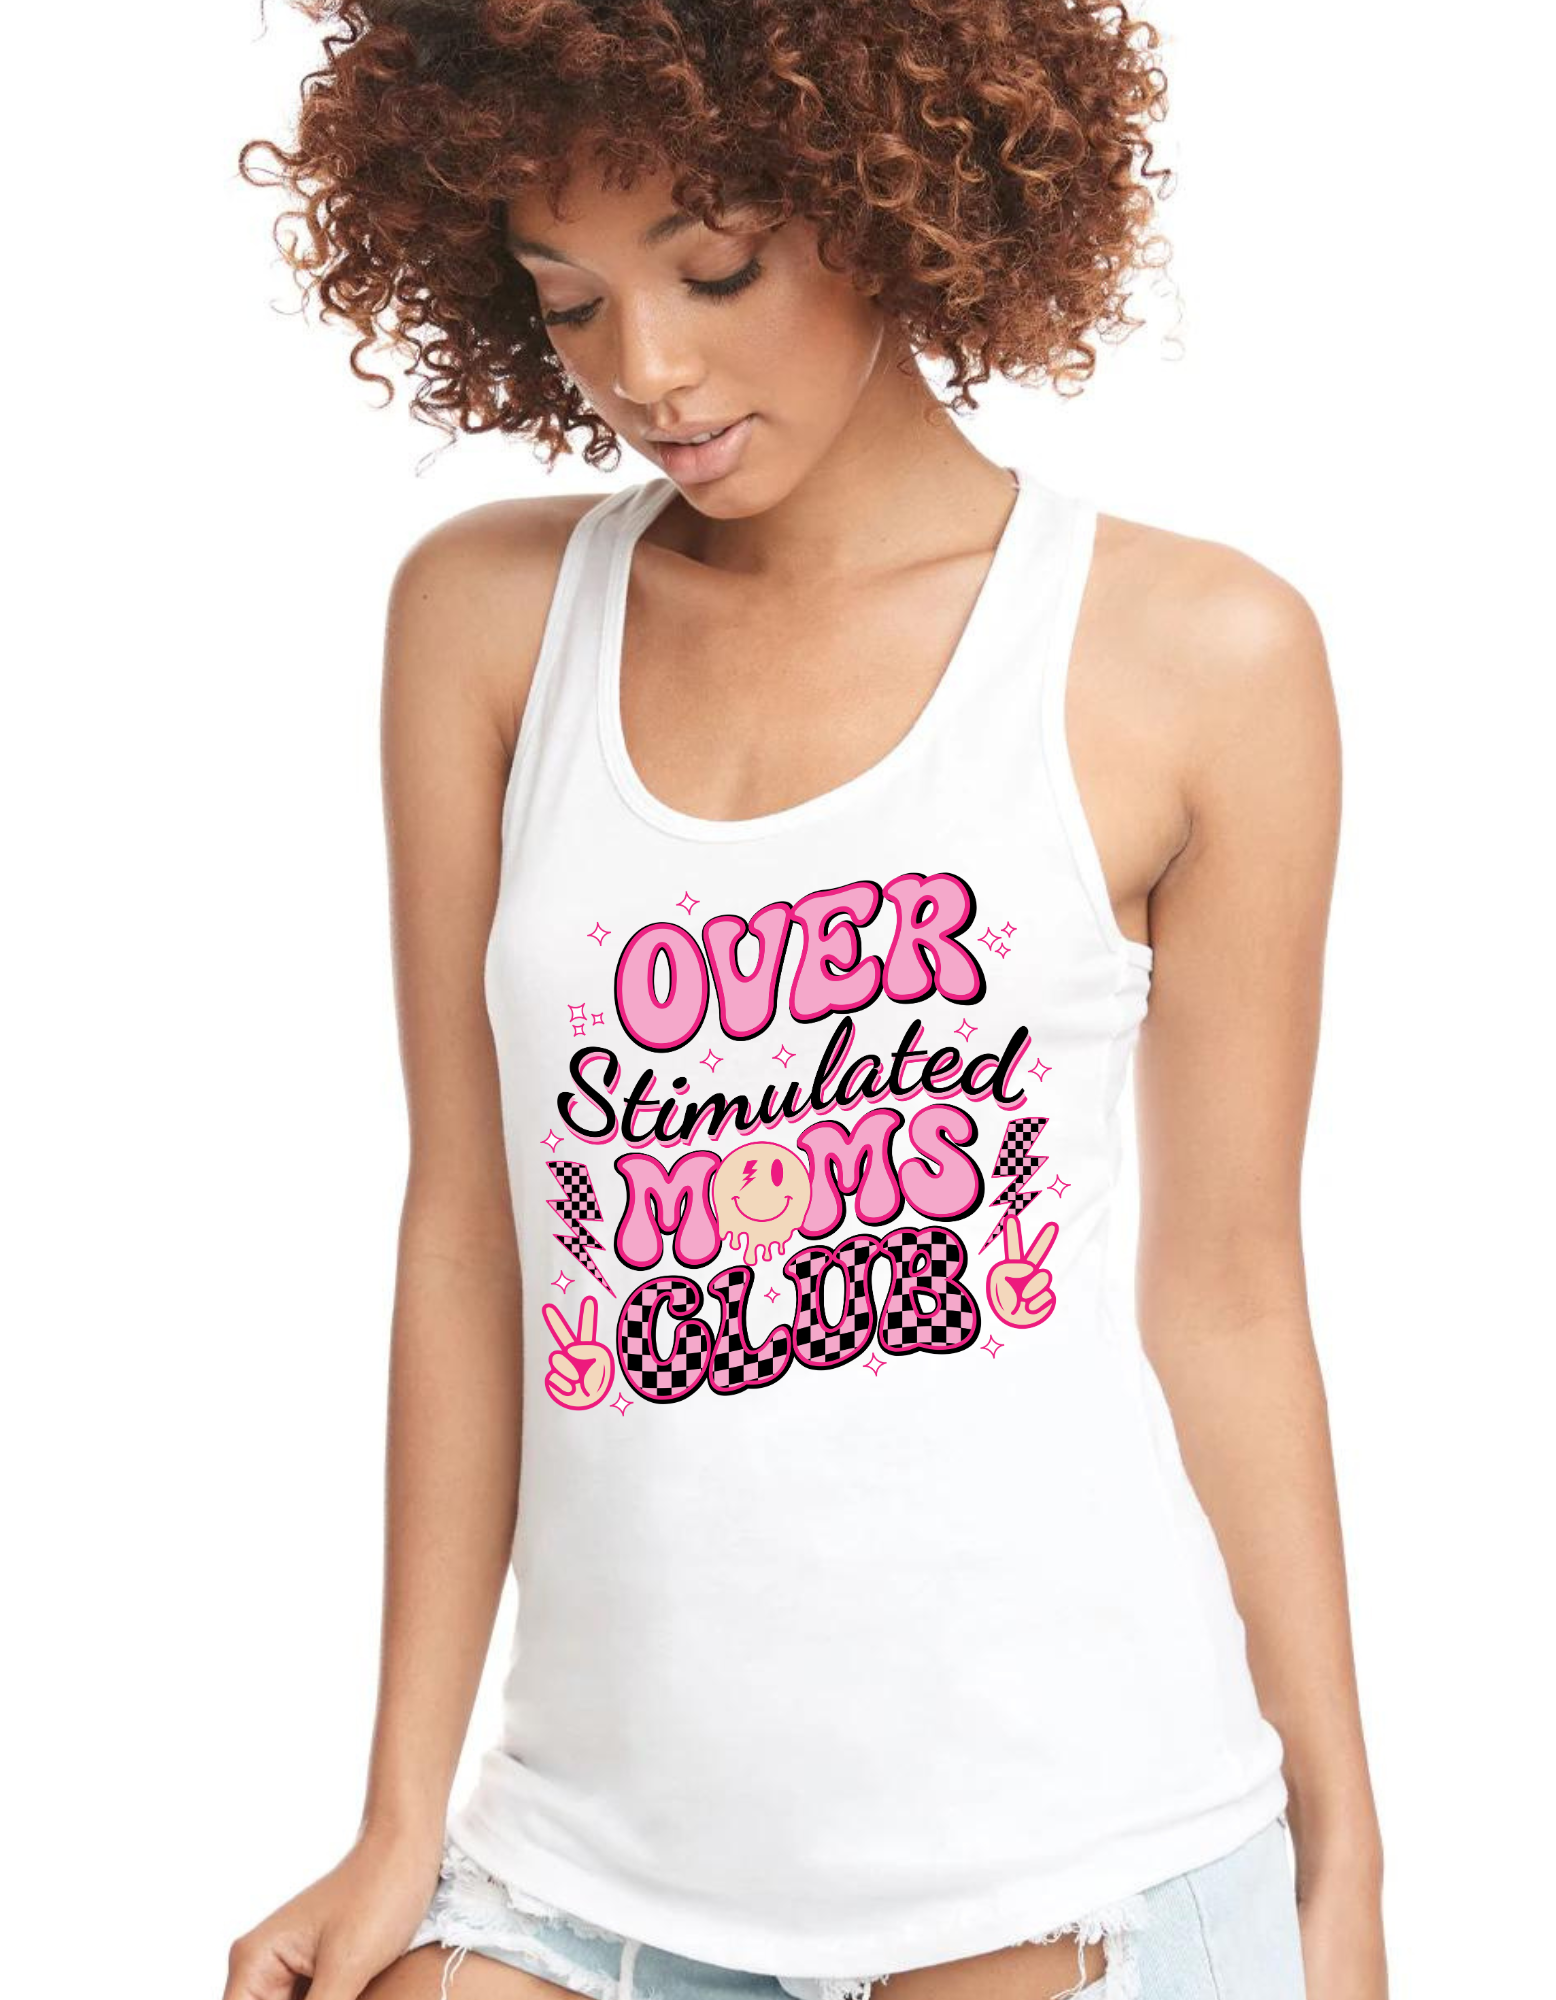 Over Stimulated Moms Club Tank Top